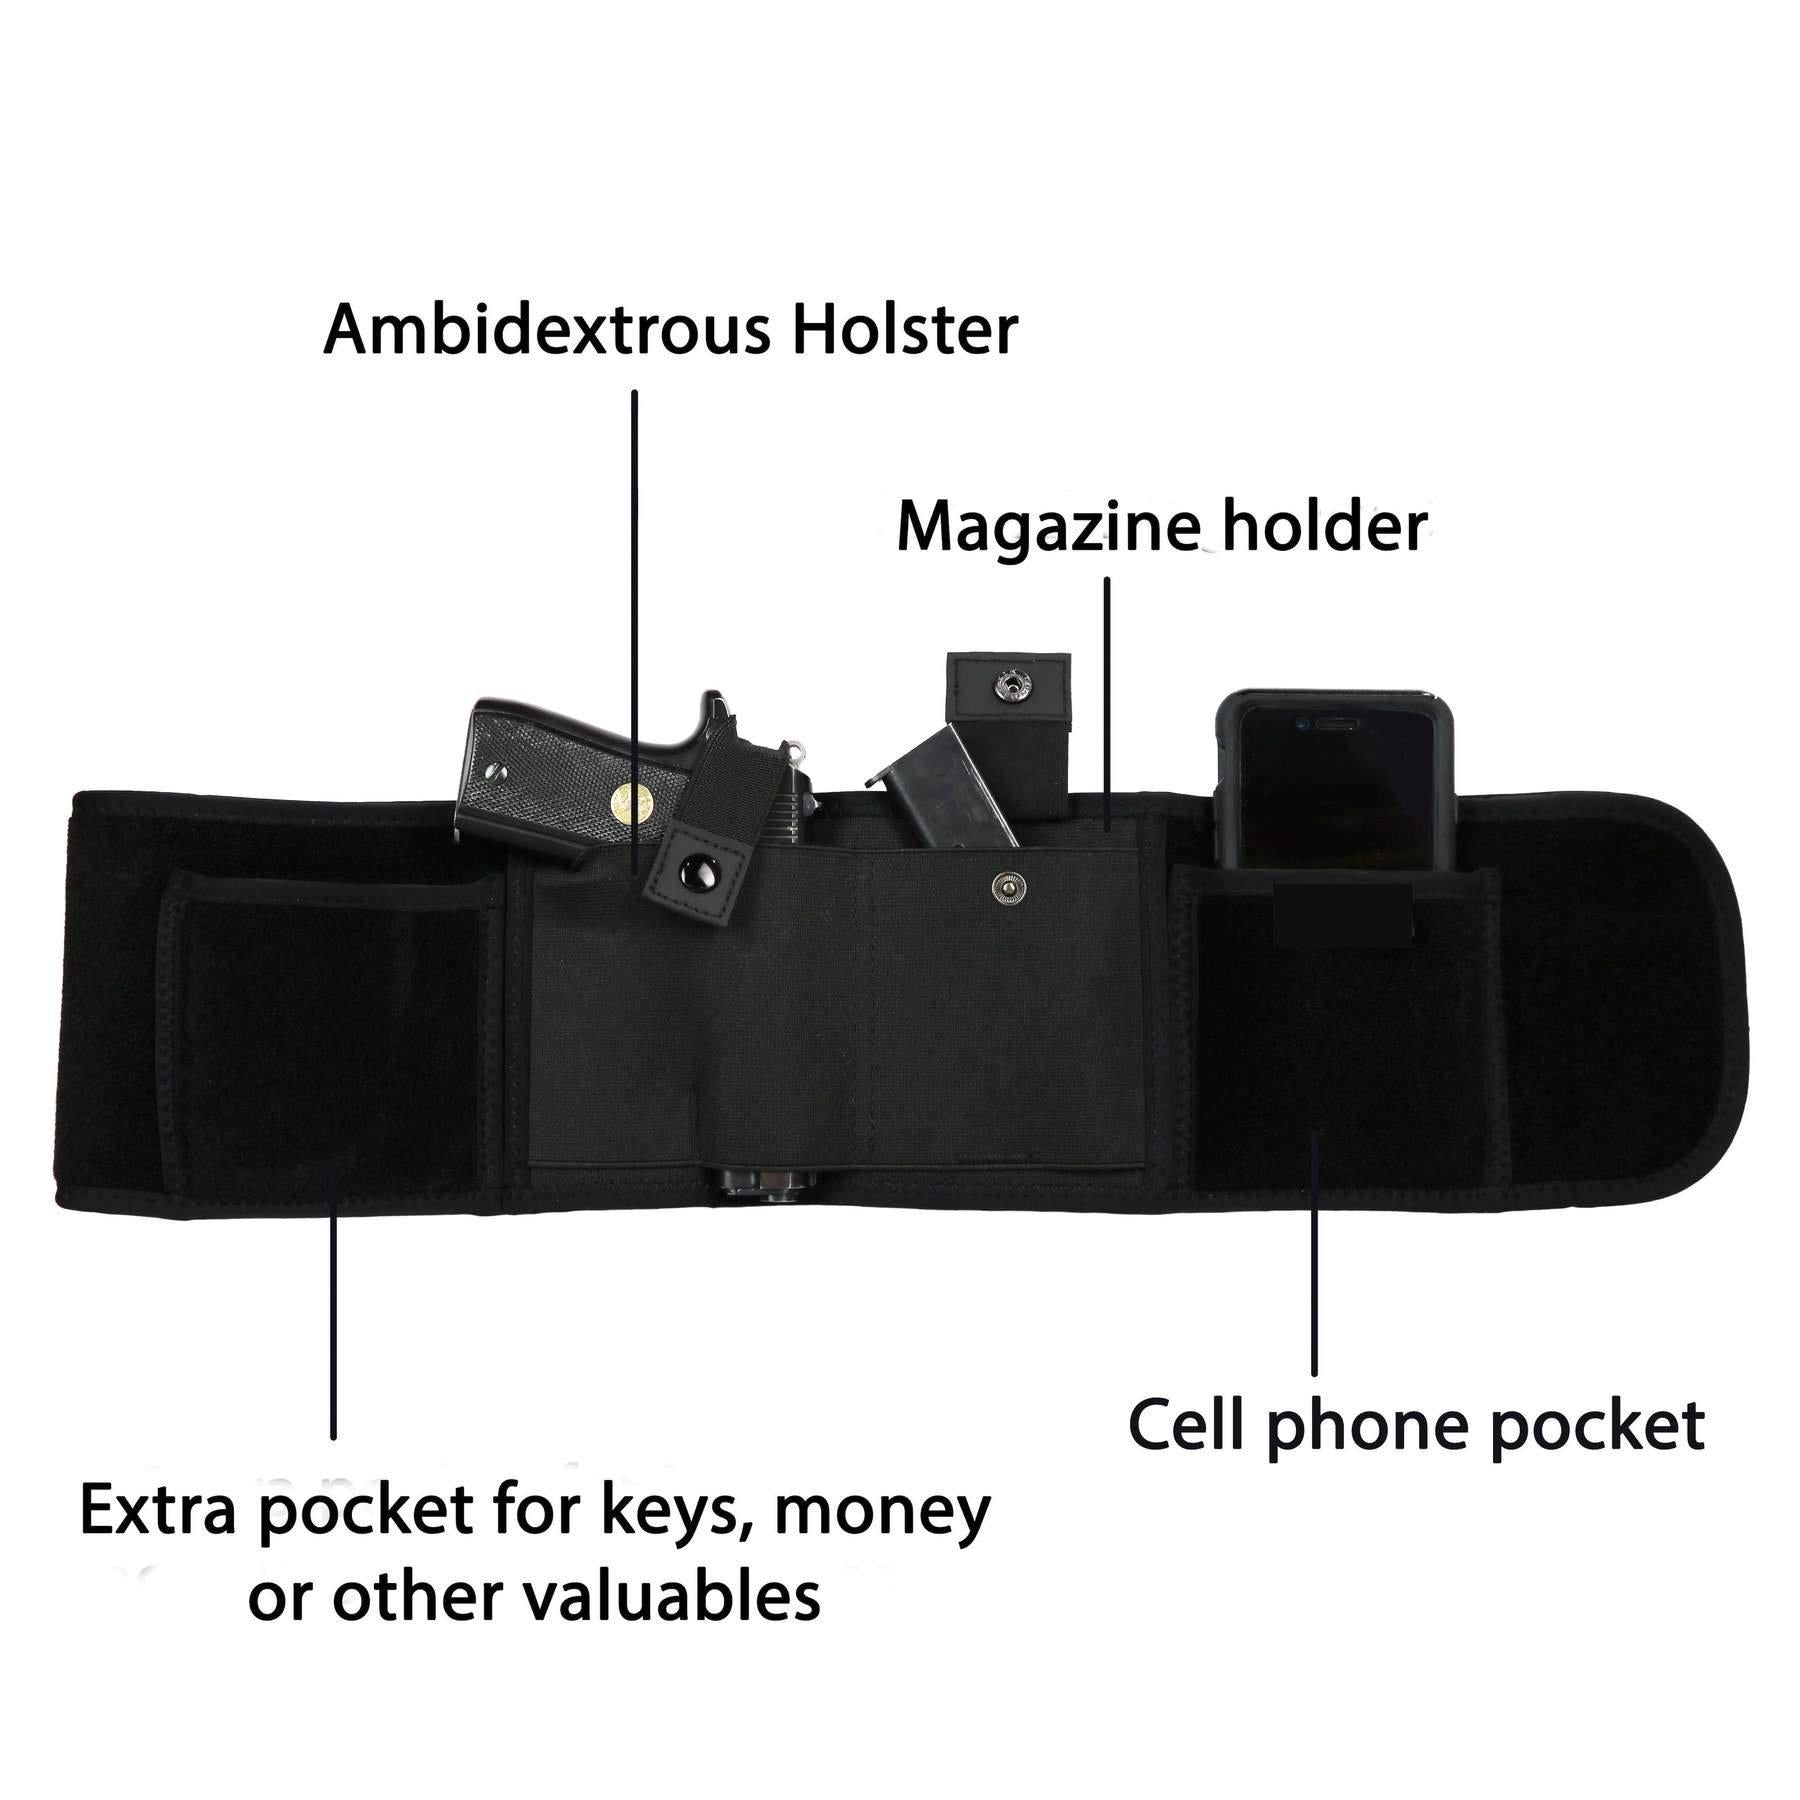 Belly Band Holster for Concealed Carry - Breathable Neoprene - Import It All